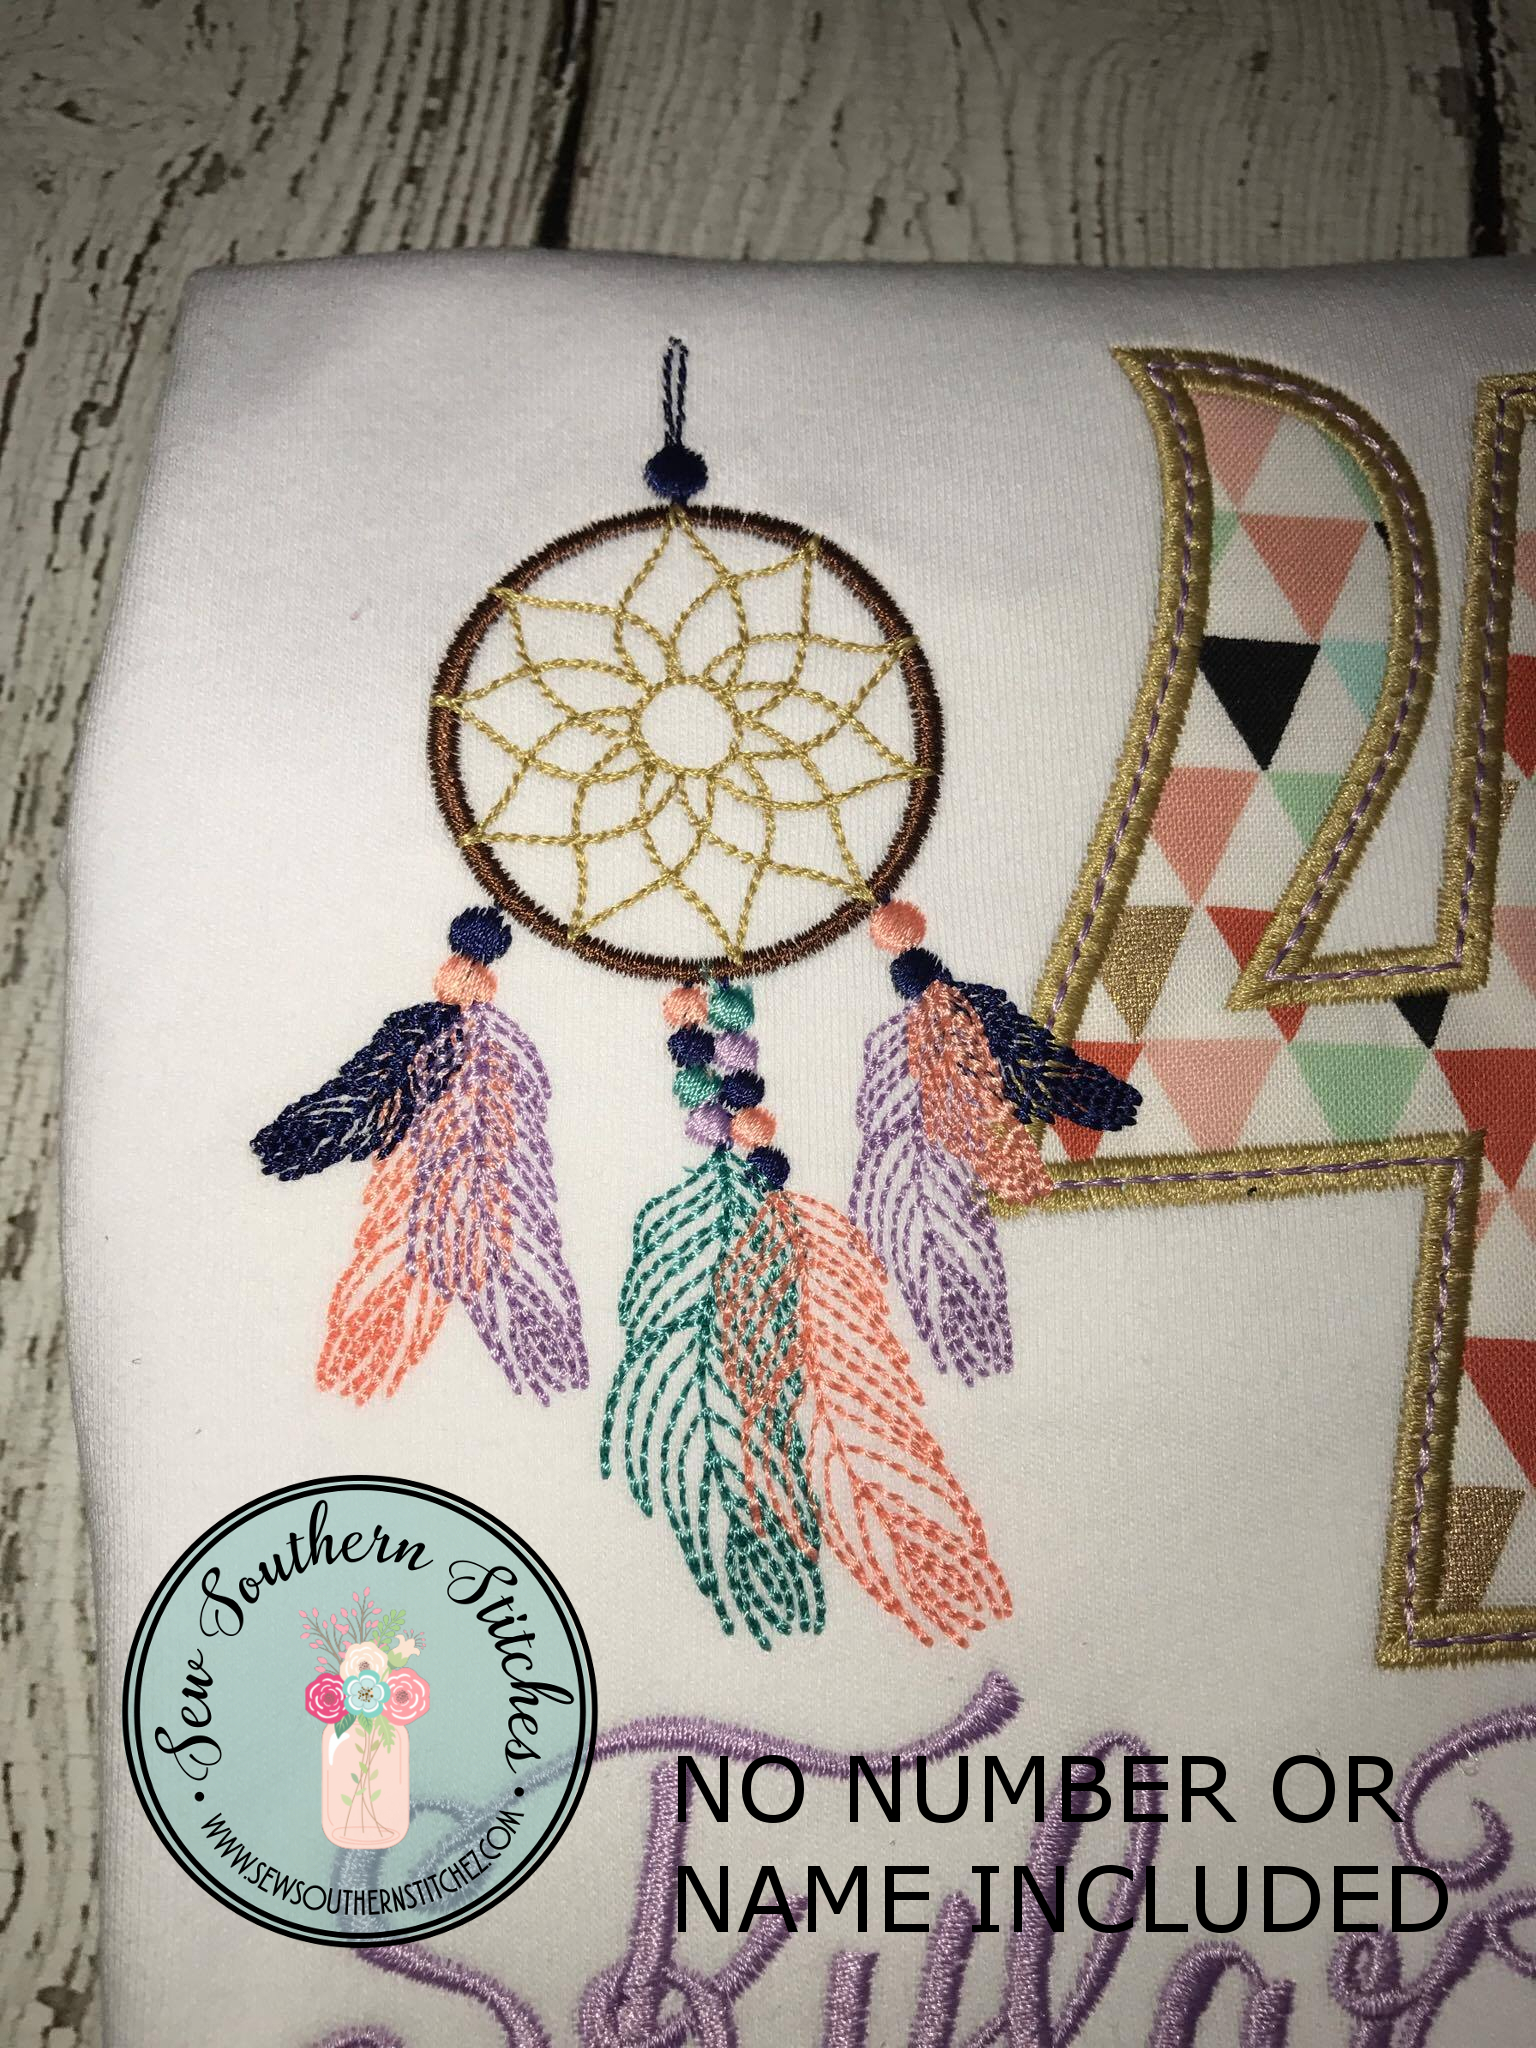 Convert Picture To Embroidery Pattern Dreamcatcher Embroidery Design Boho Chic Indian Feathers